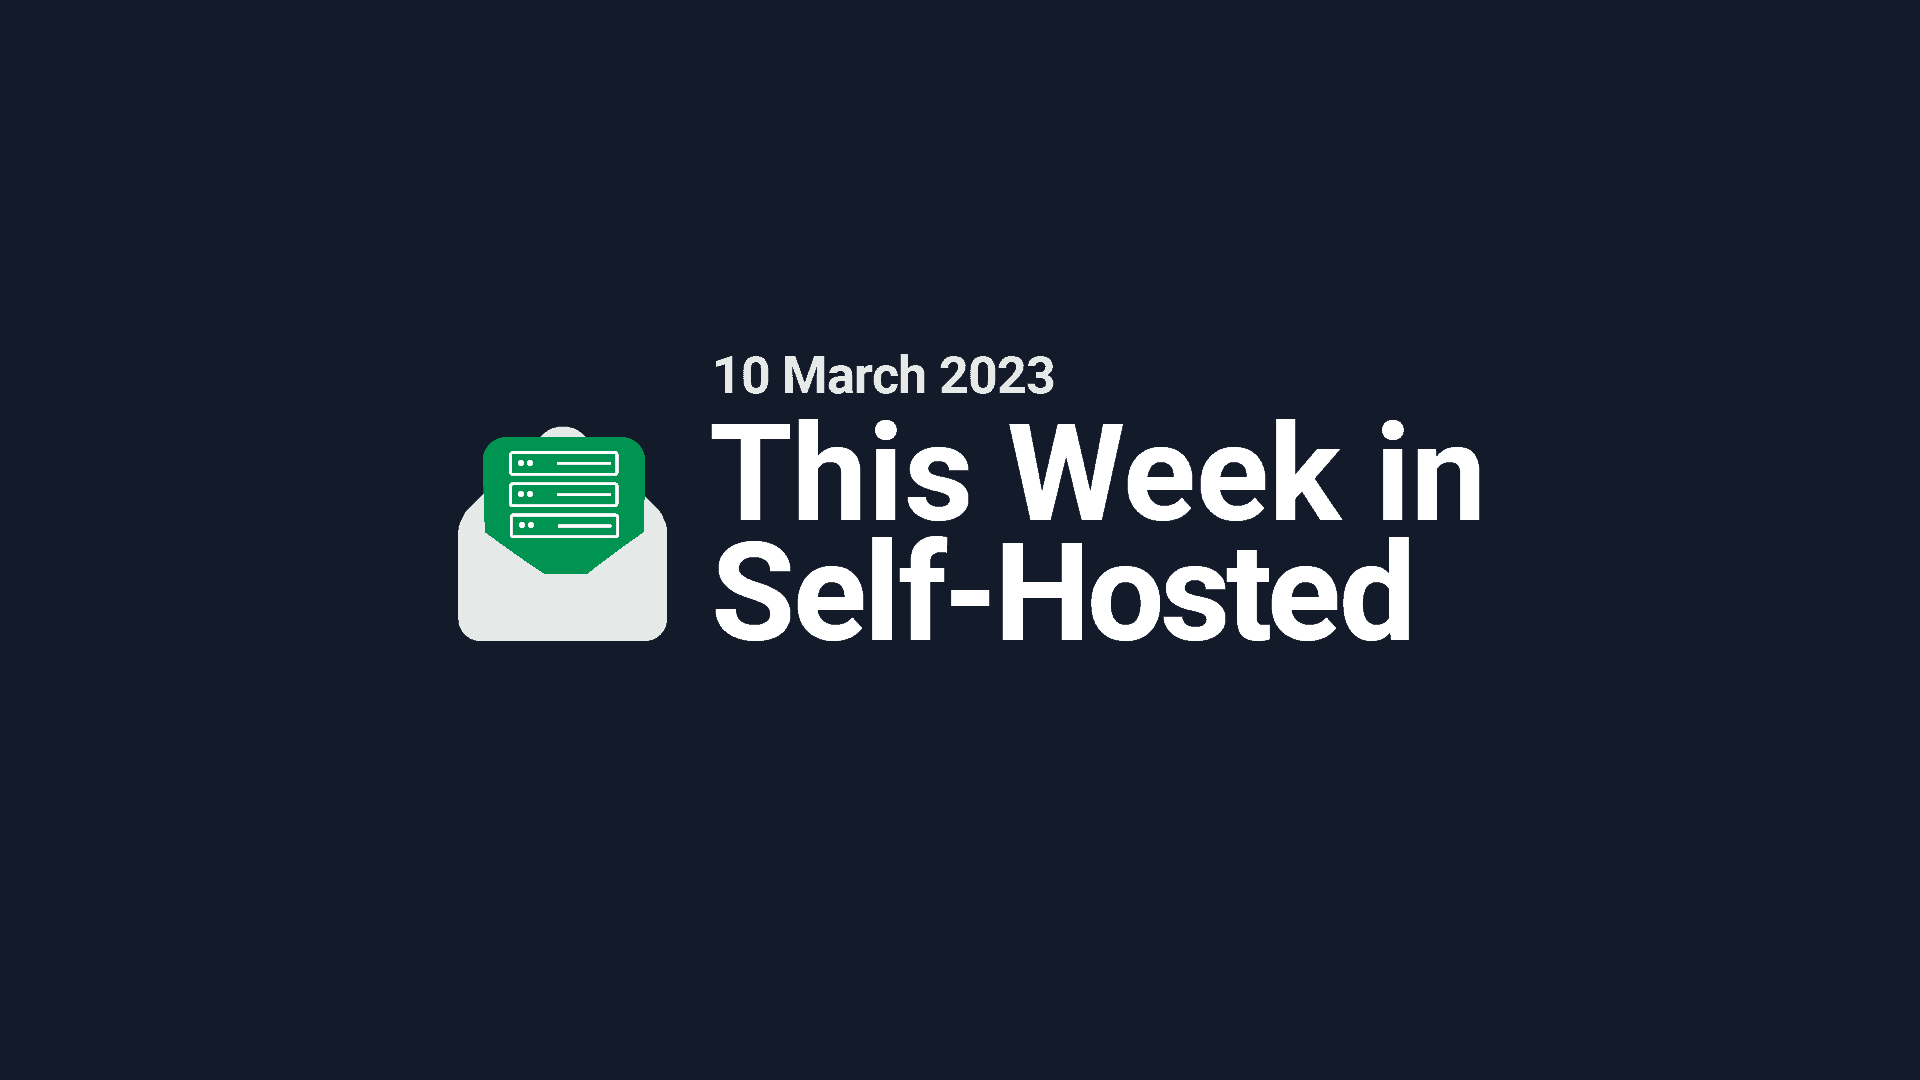 This Week in Self-Hosted (10 March 2023) Post image